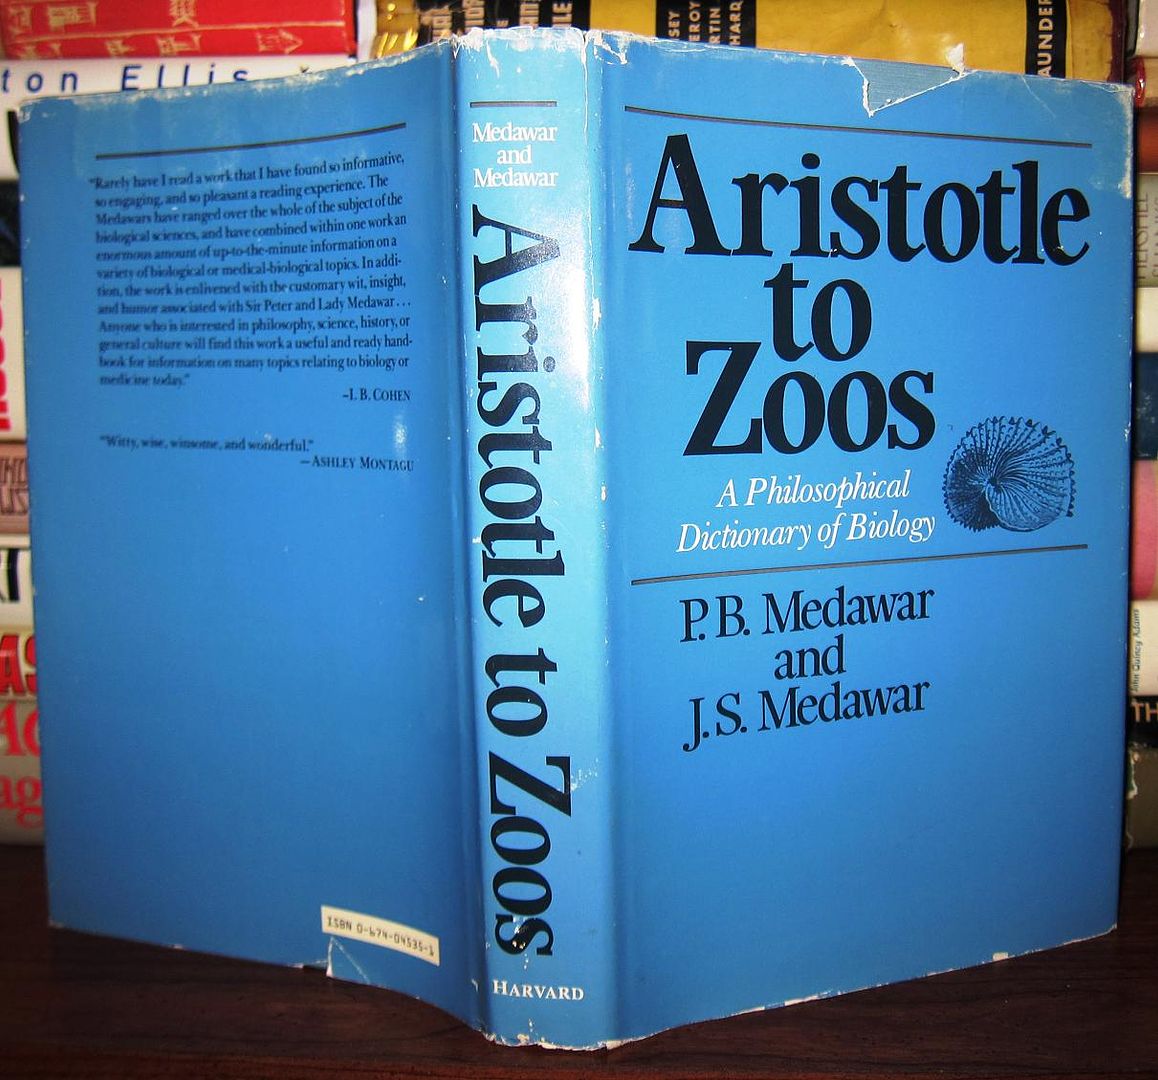 MEDAWAR, P. B. & J. S. MEDAWAR - Aristotle to Zoos a Philosophical Dictionary of Biology